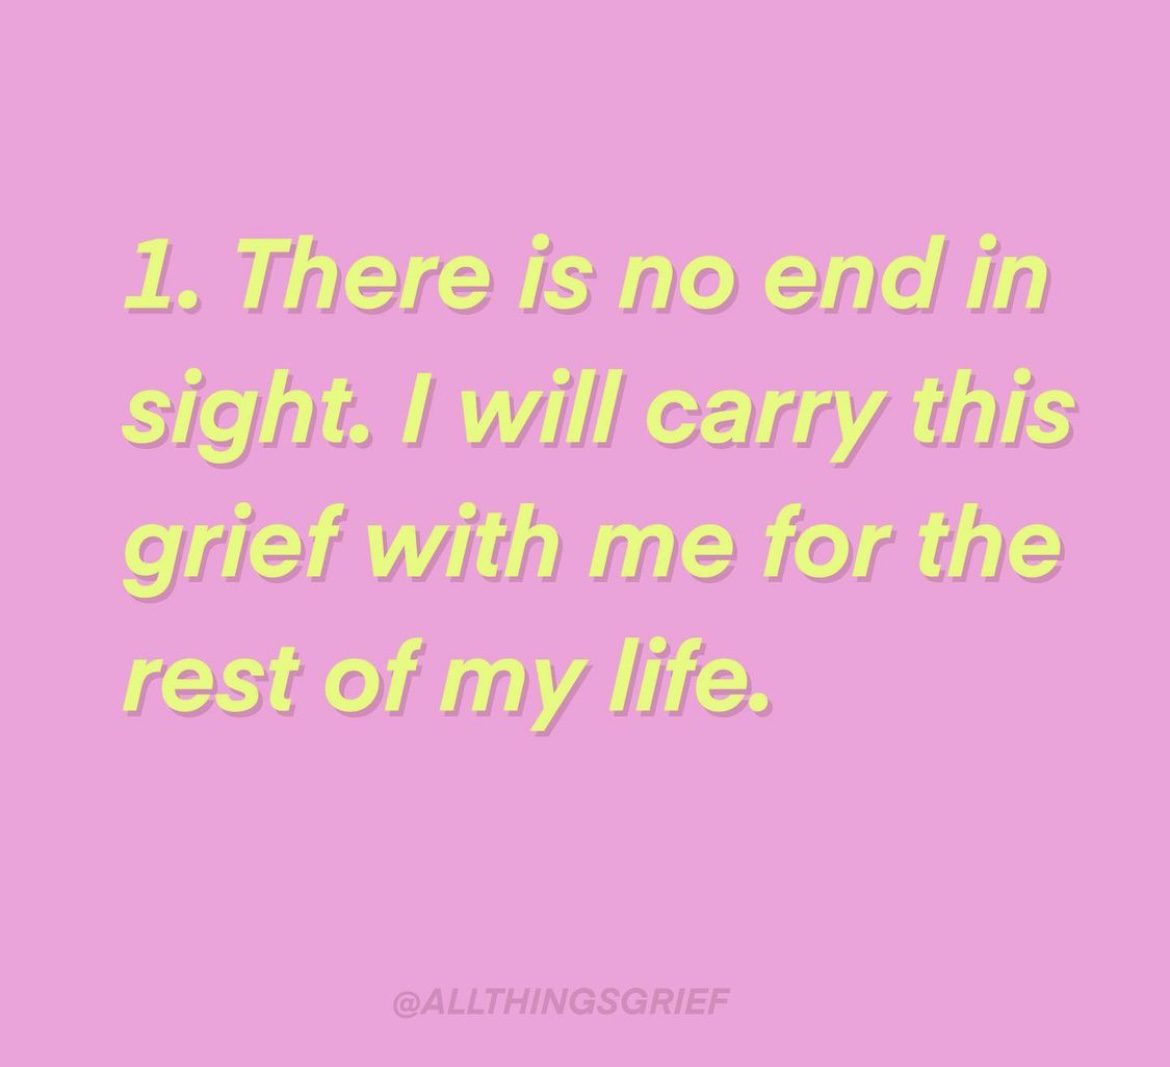 advice on how to help a grieving friend